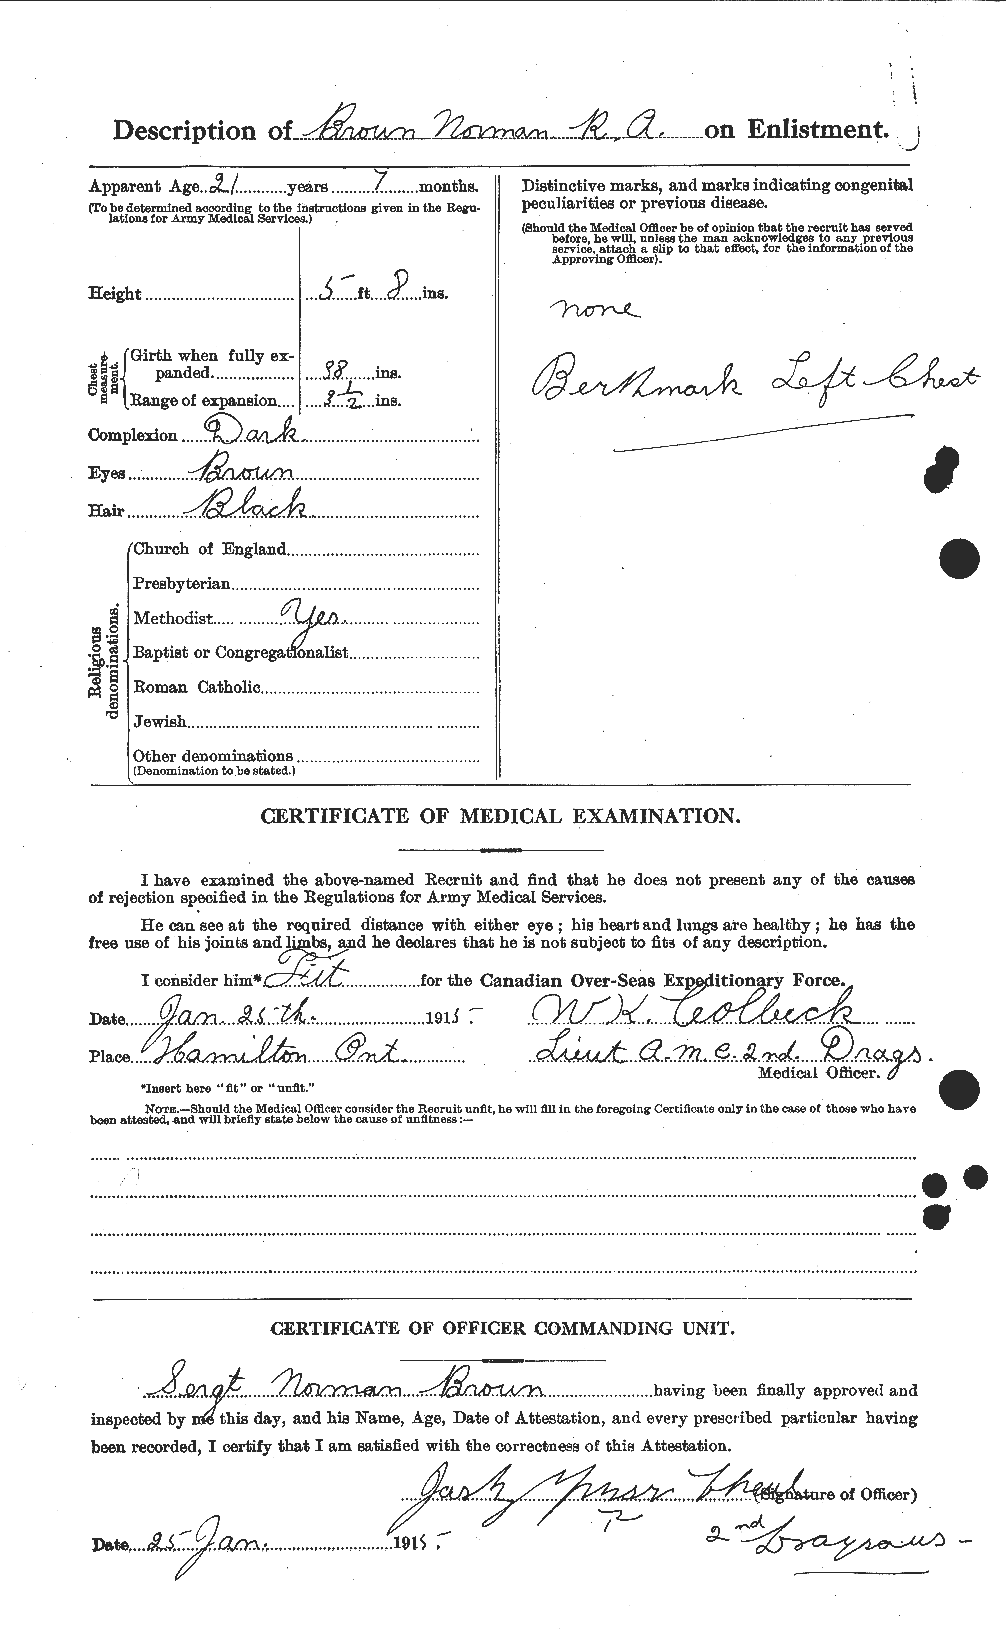 Personnel Records of the First World War - CEF 267117b